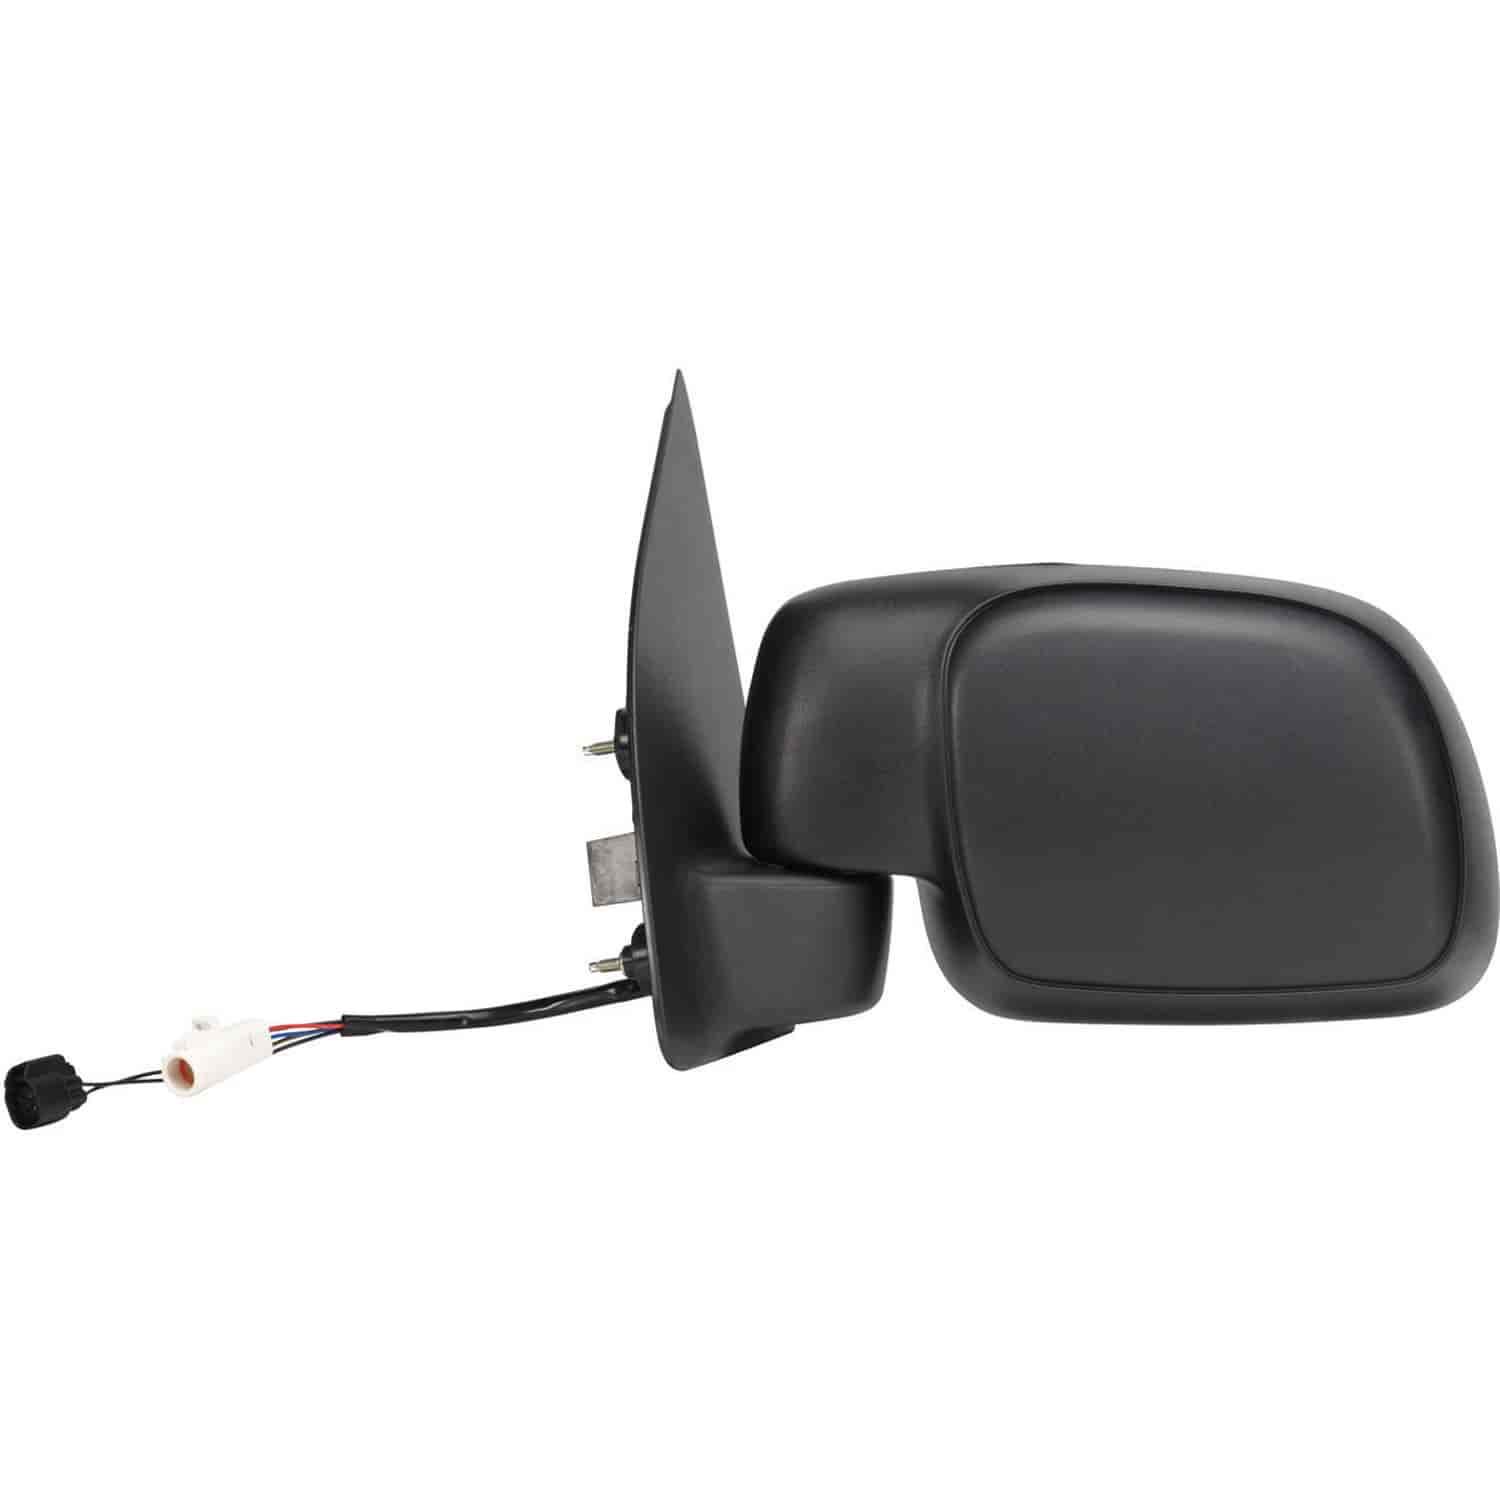 OEM Style Replacement mirror for 00-01 Ford Excursion w/o signal driver side mirror tested to fit an